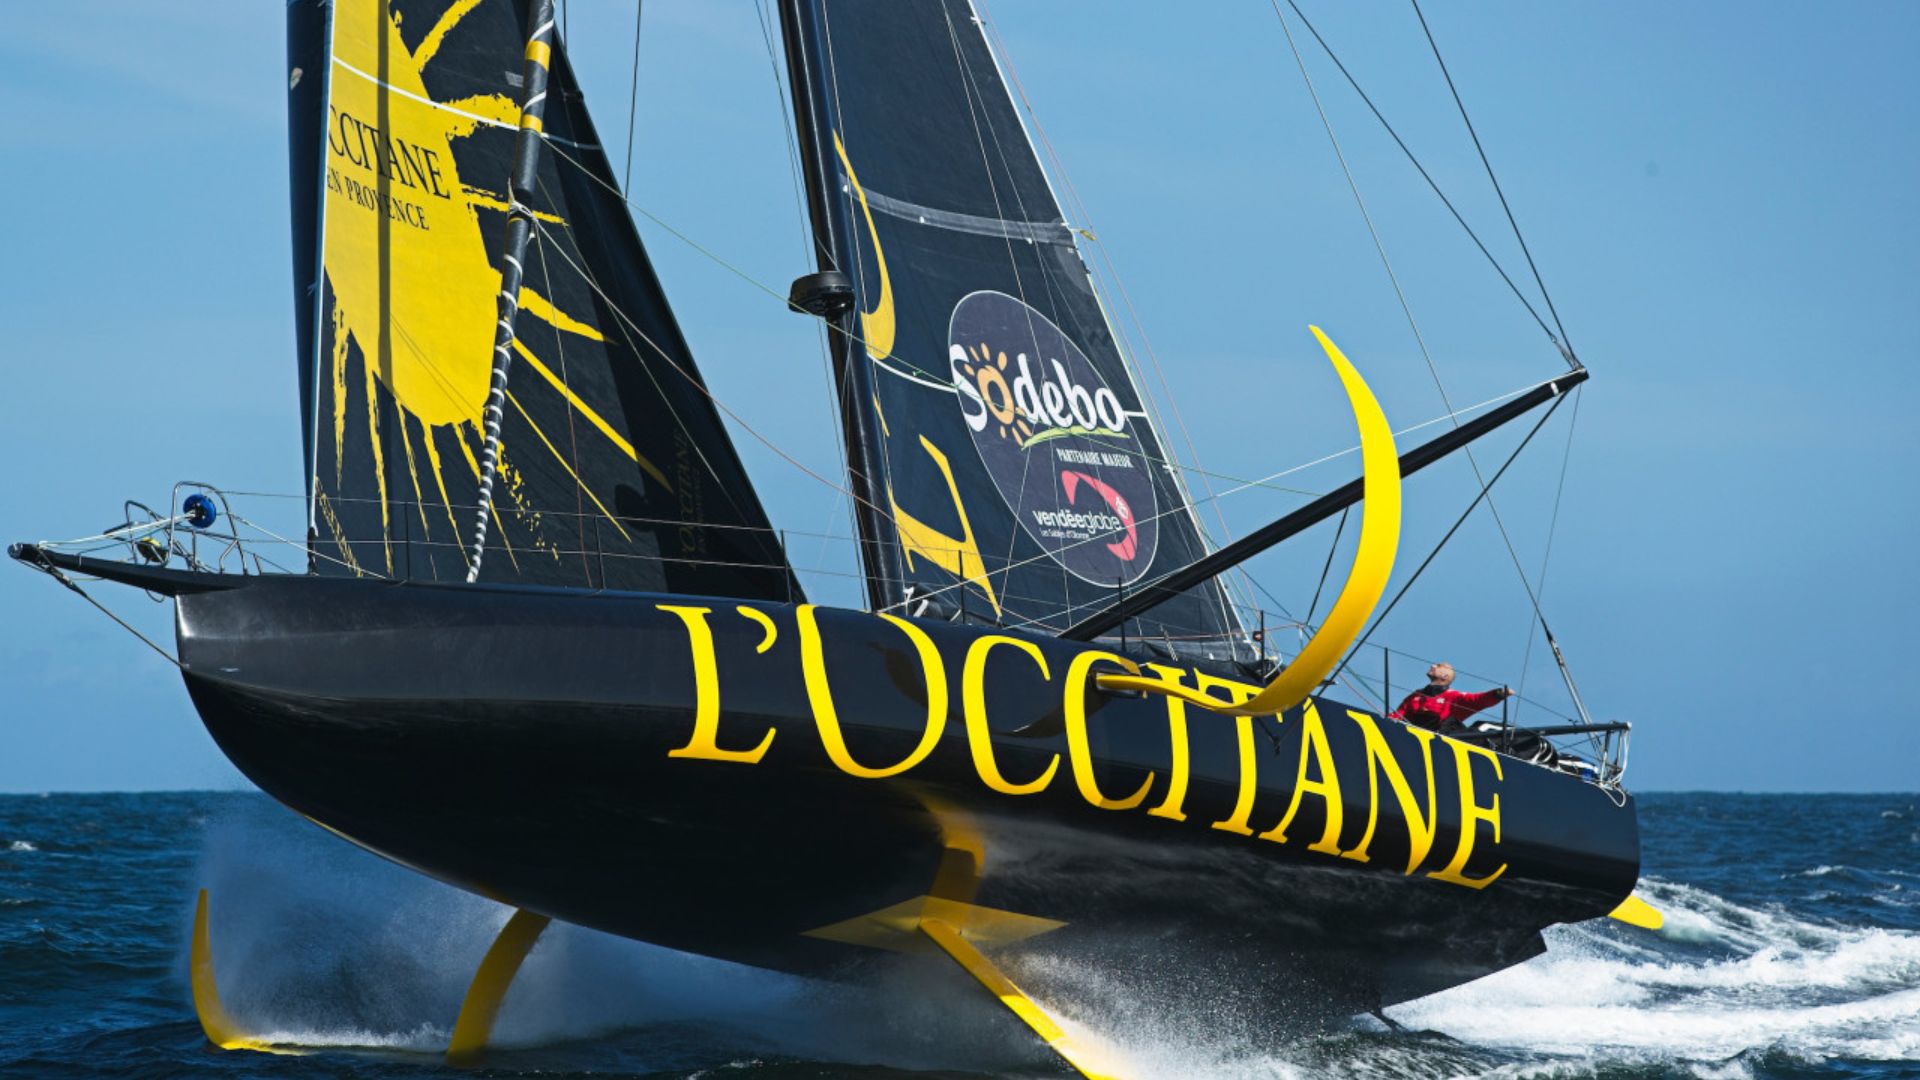 IMOCA: what does it mean and what are its characteristics?